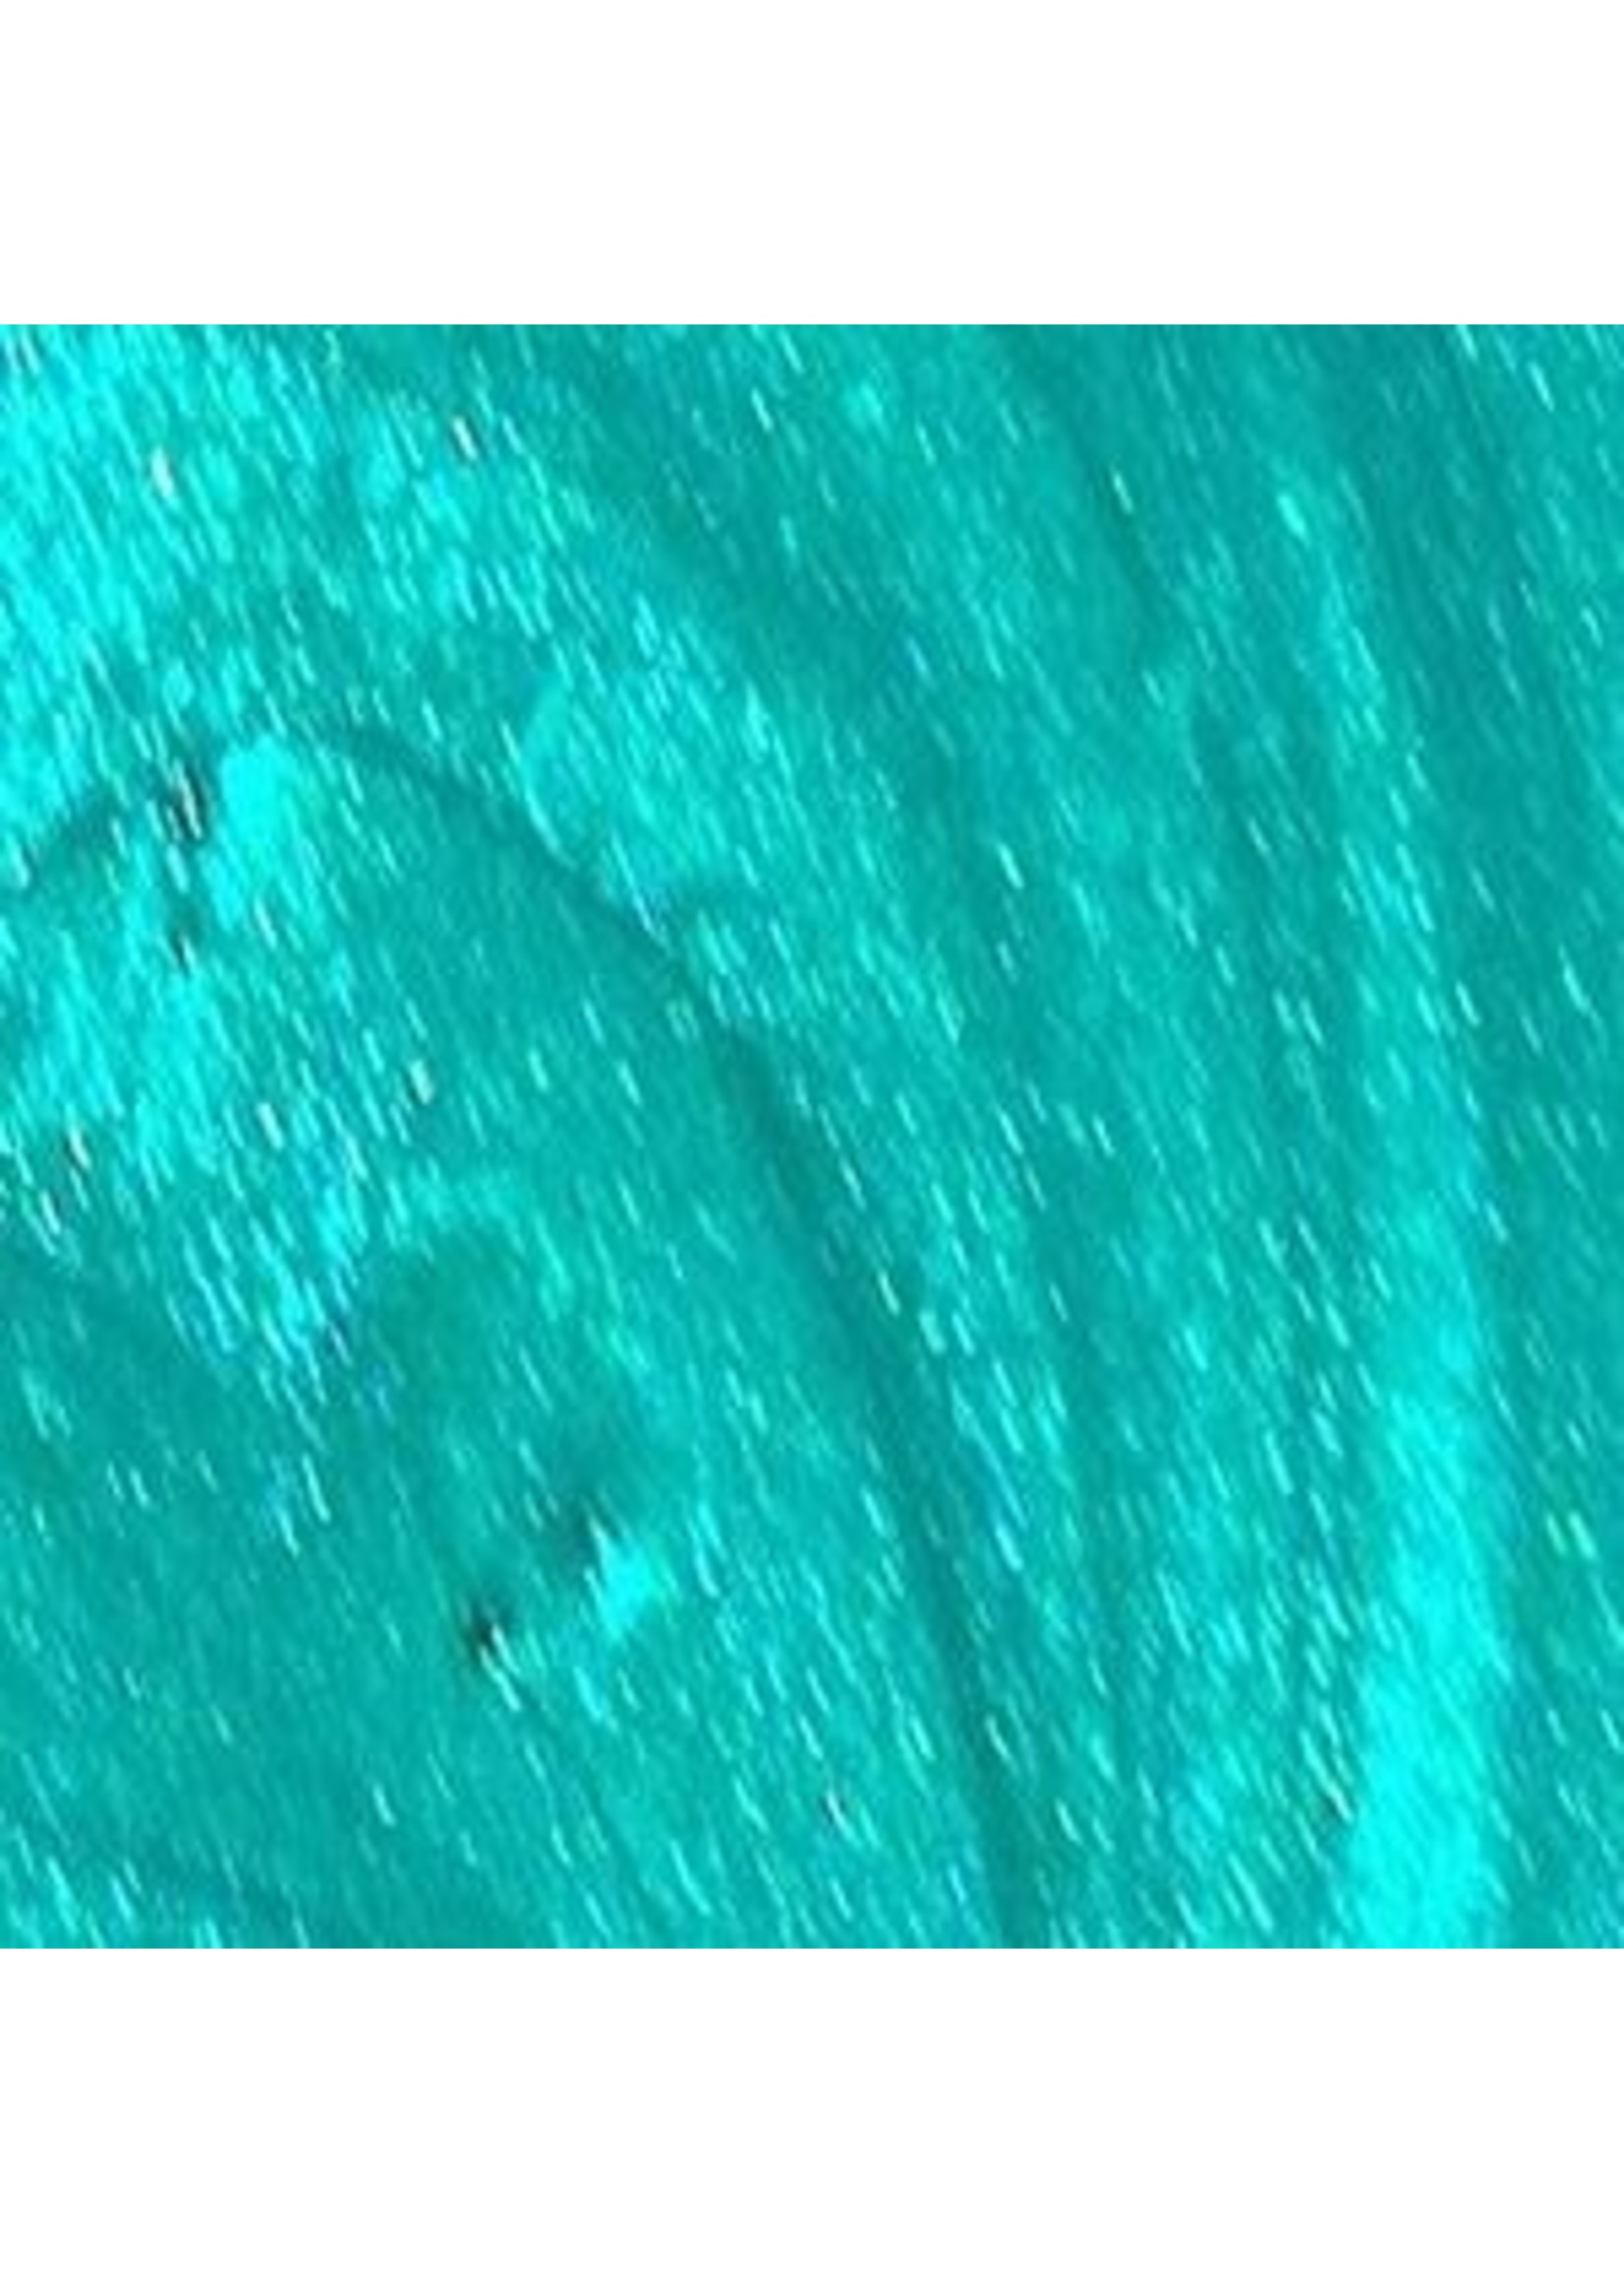 Mission Models MMP-160 - Iridescent Duck Teal 1oz